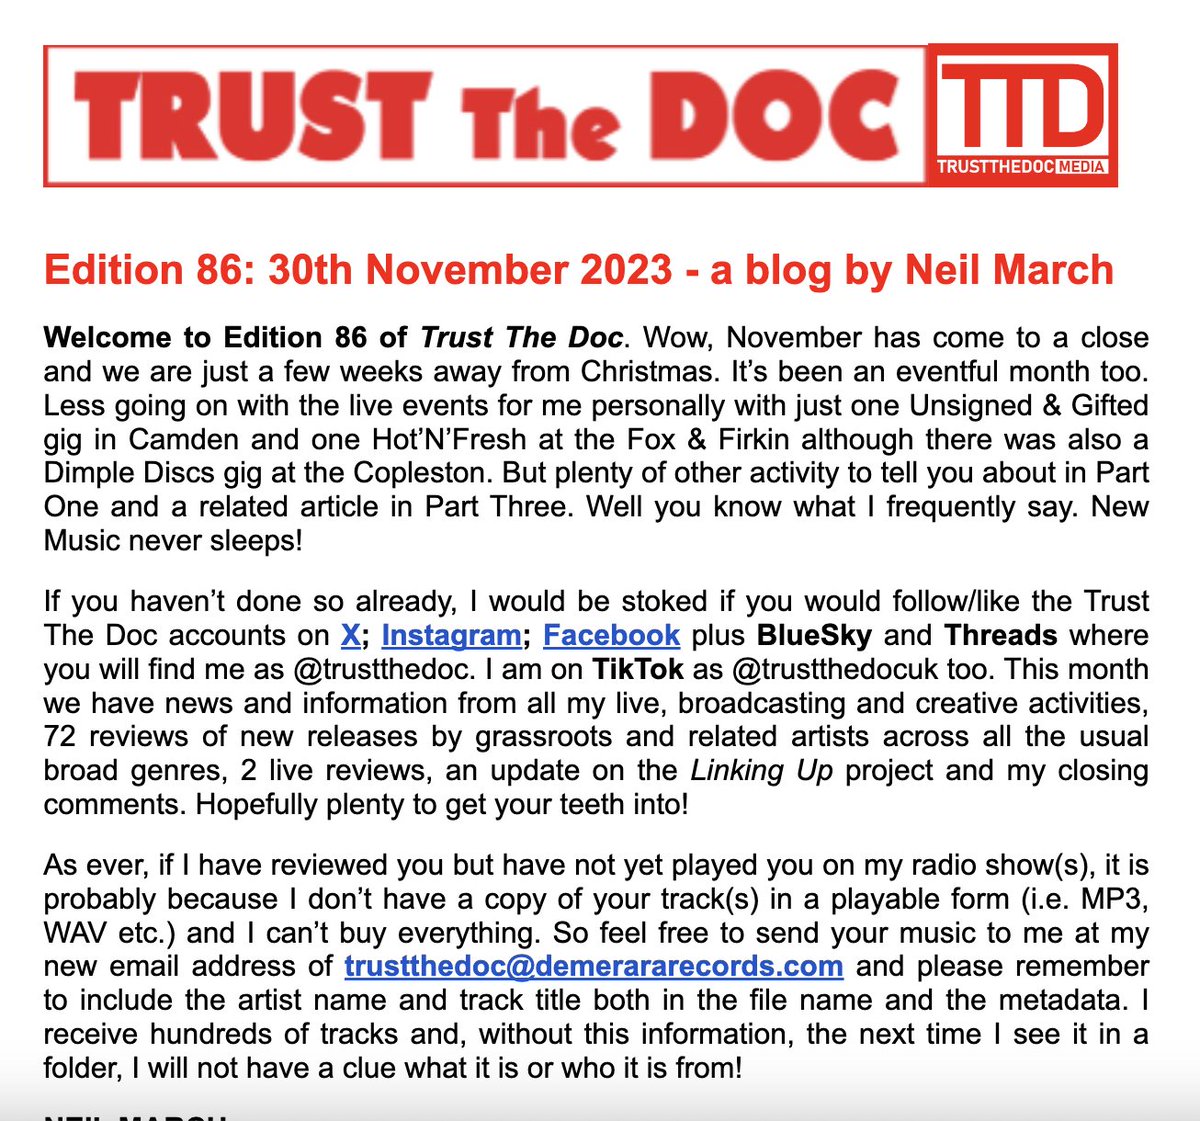 Ed 86 #TrustTheDoc published today ft: - news & info from around the live & associated scene - over 80 reviews of new tracks by grassroots artists - 2 live gig reviews - an update on an exciting project & more incl: @musicofsounduk @geereedmusic #Rusty #Louie @niawynmusic + ....